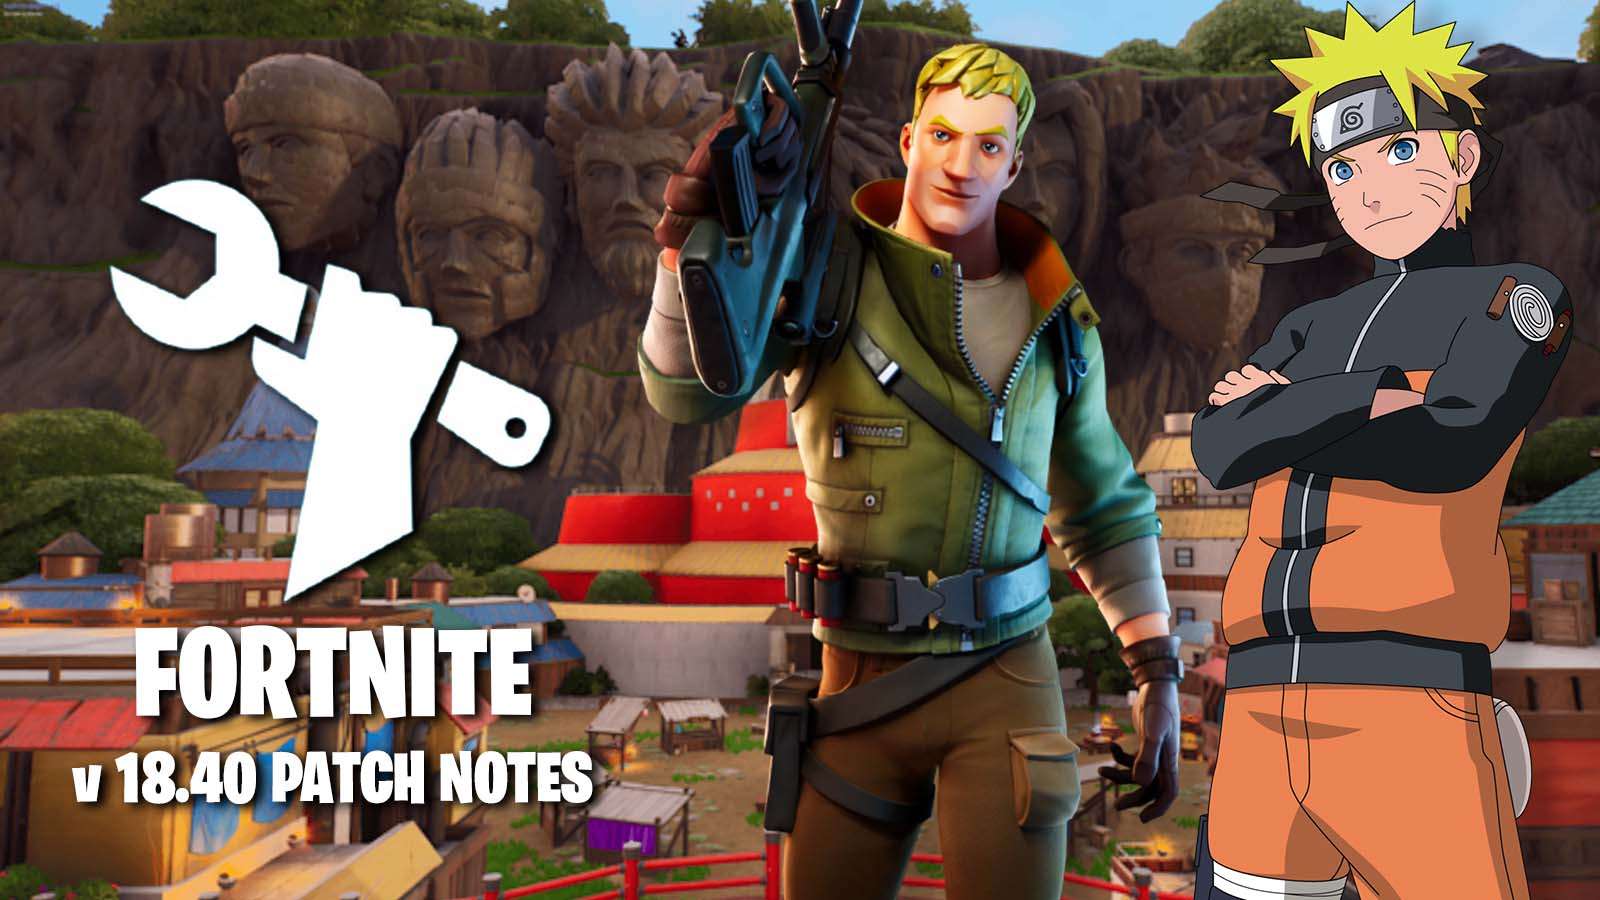 Fortnite-18.40-update-patch-notes